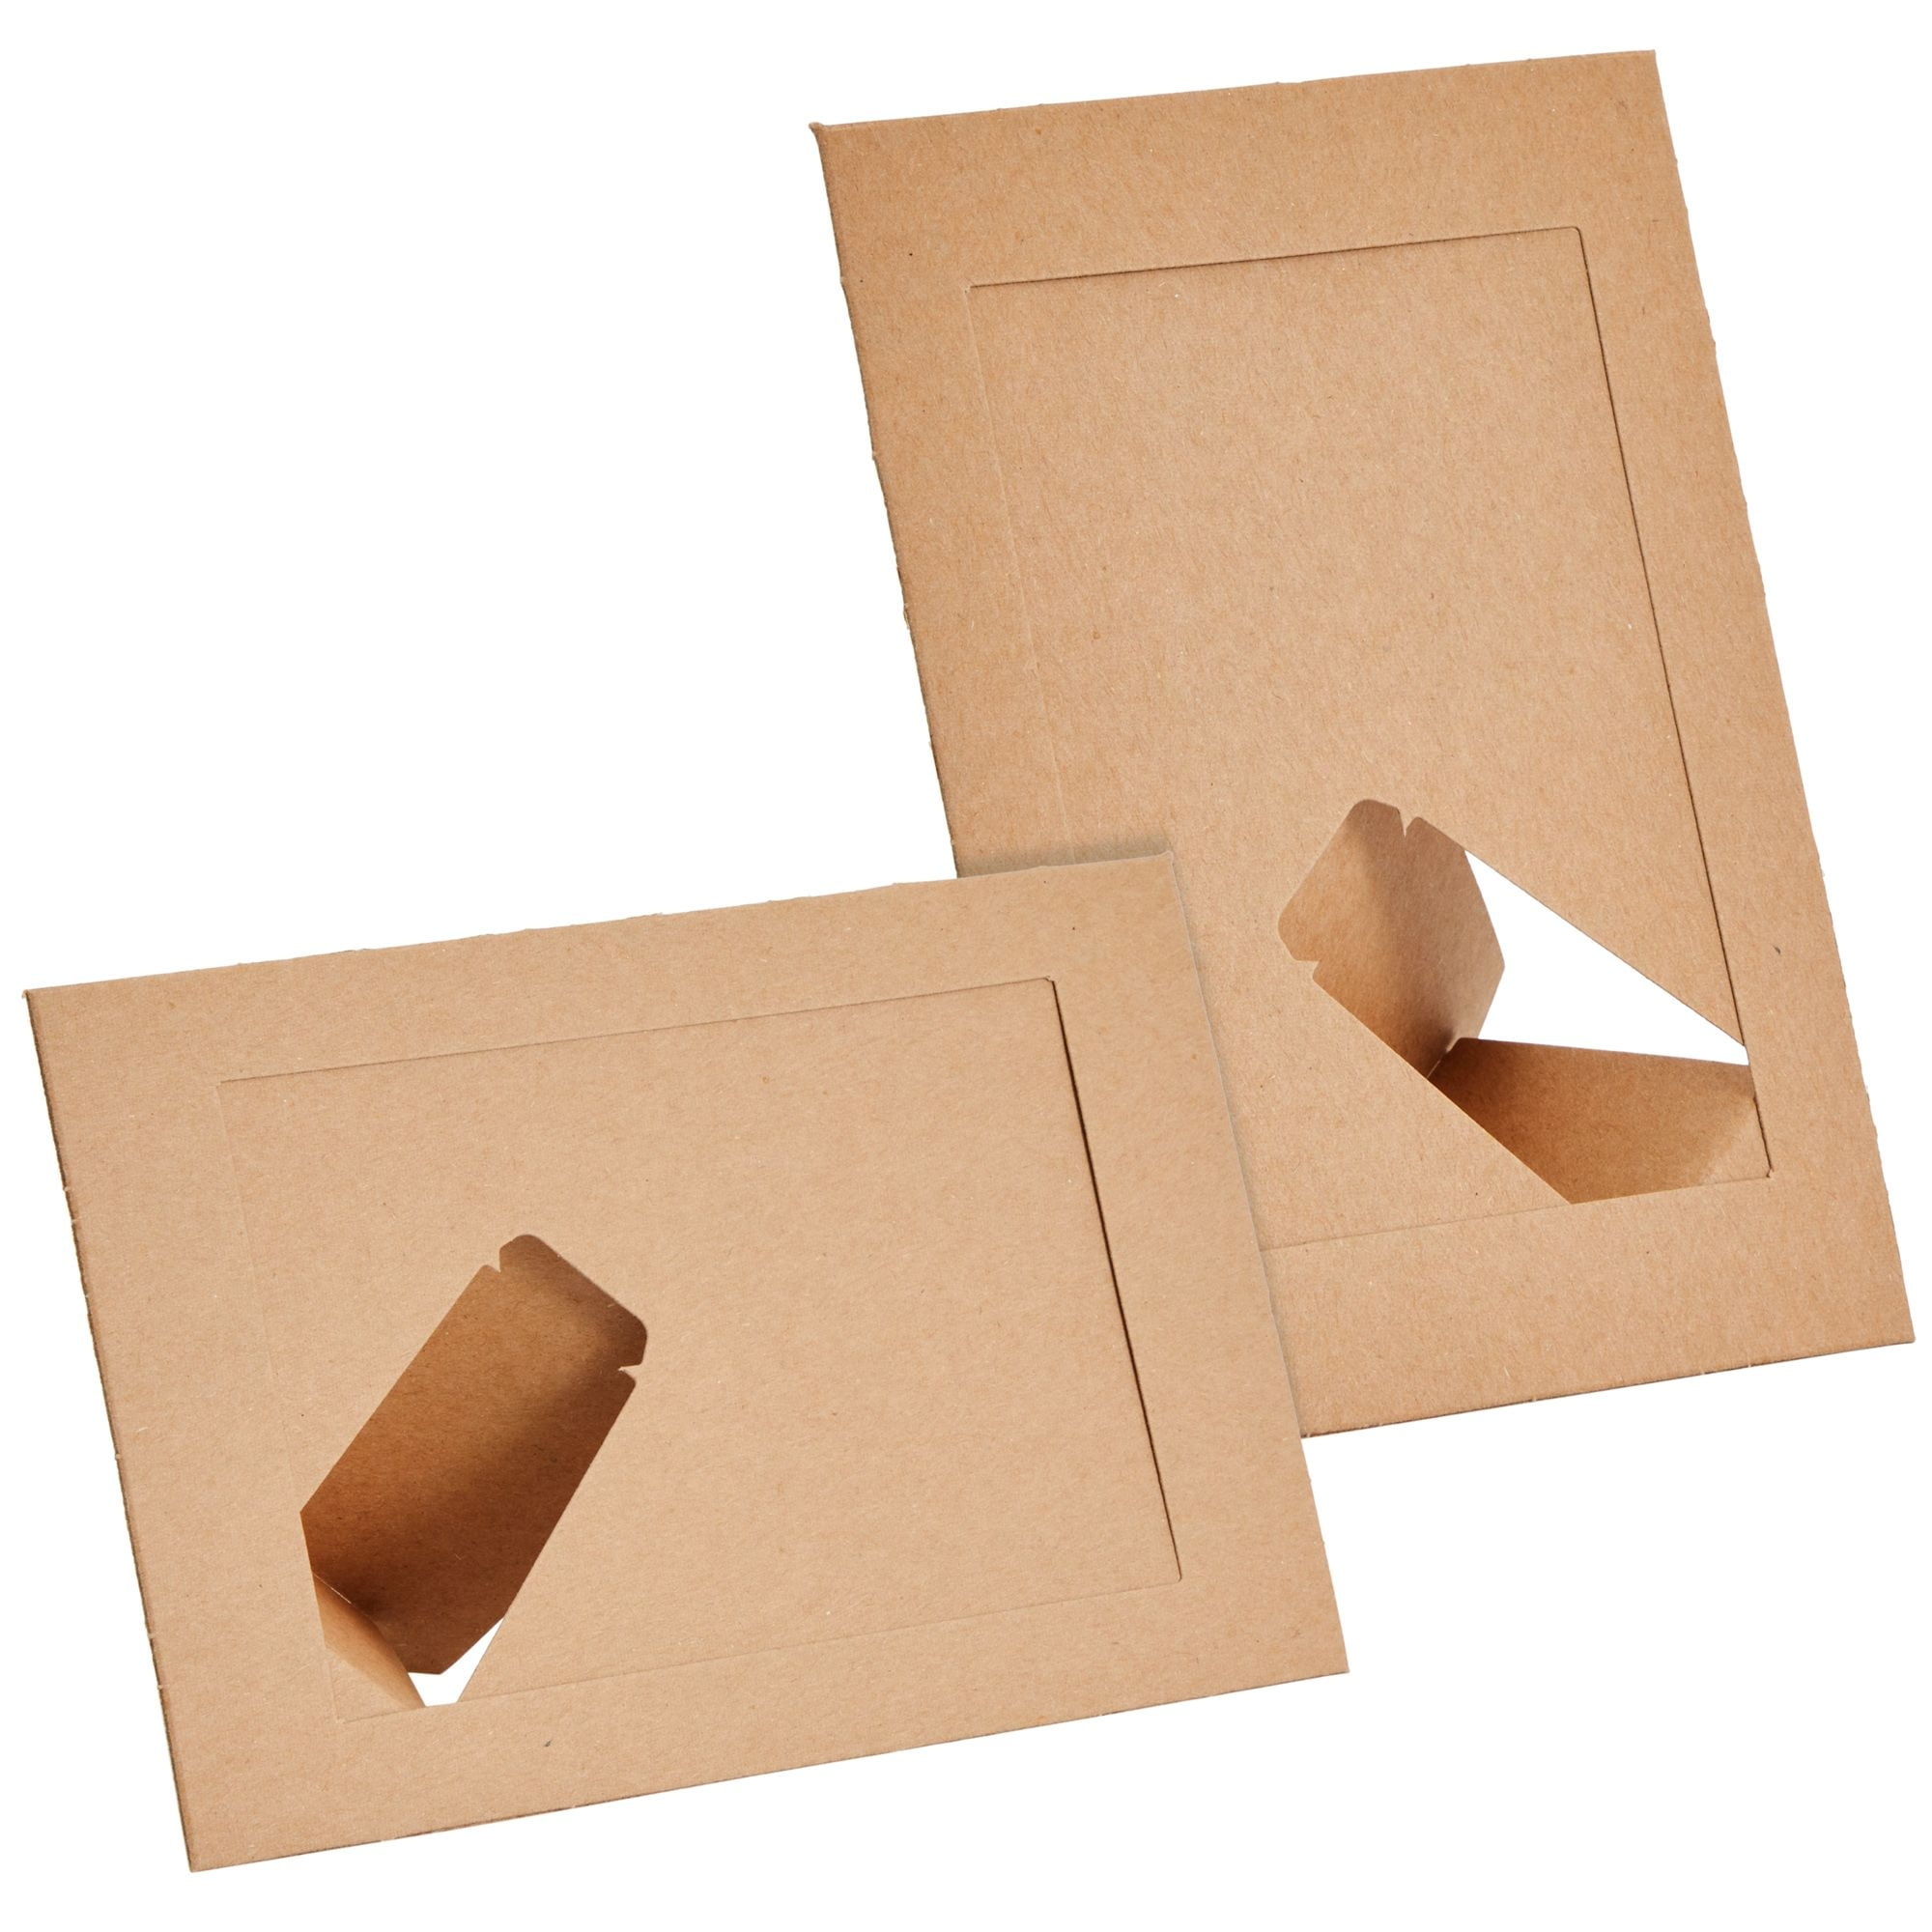 50 Pack White Paper Picture Frames for 4x6 Inserts, Cardboard